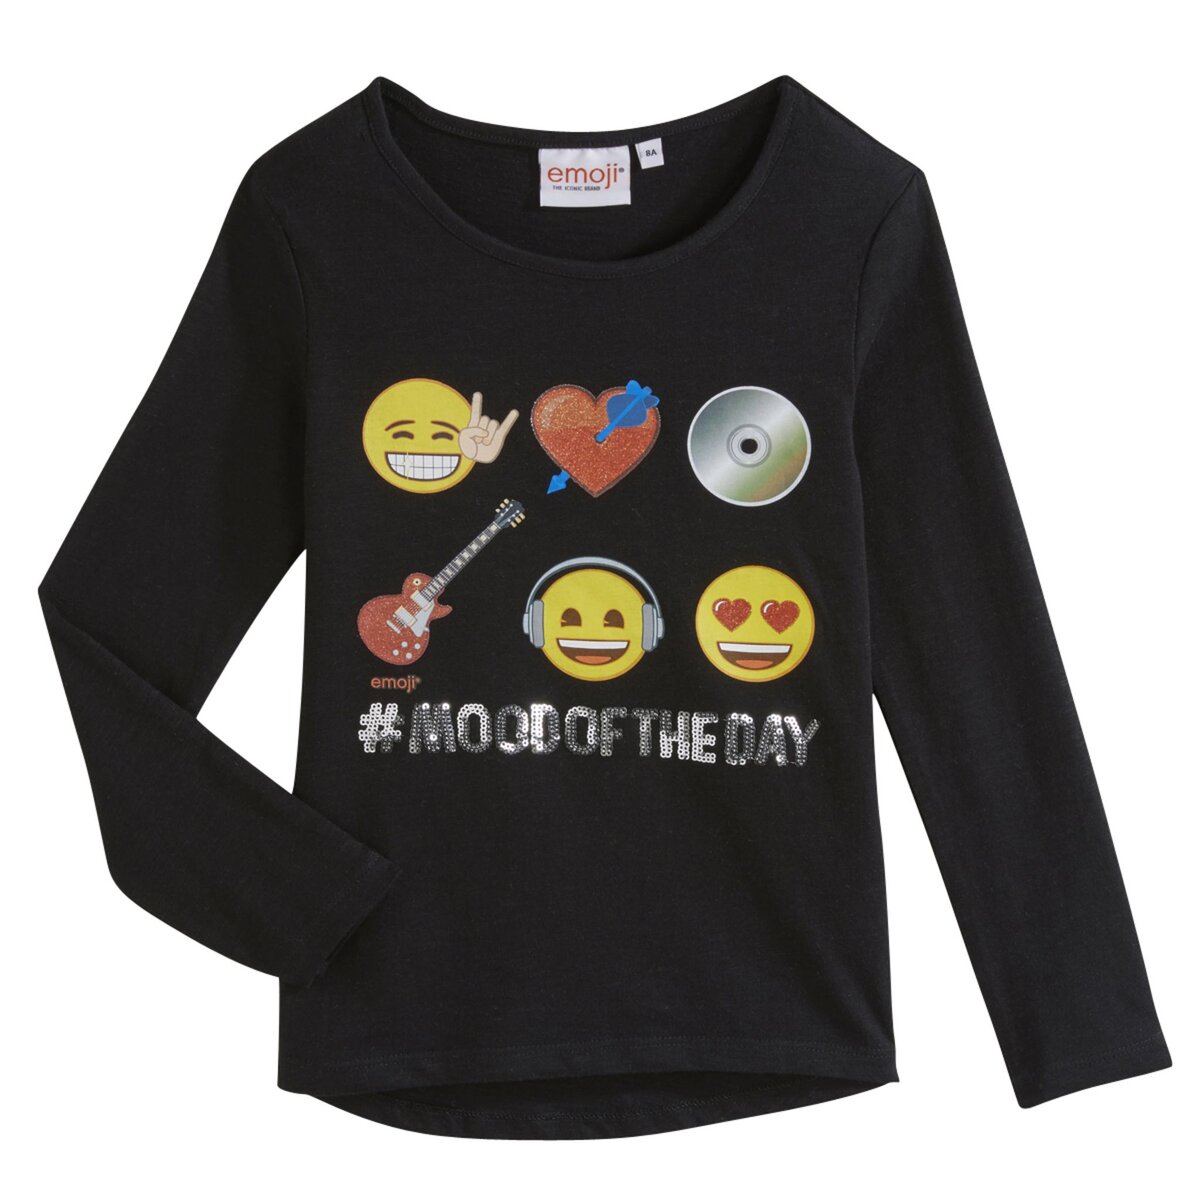 IN EXTENSO Tee-shirt manches longues Emoji fille